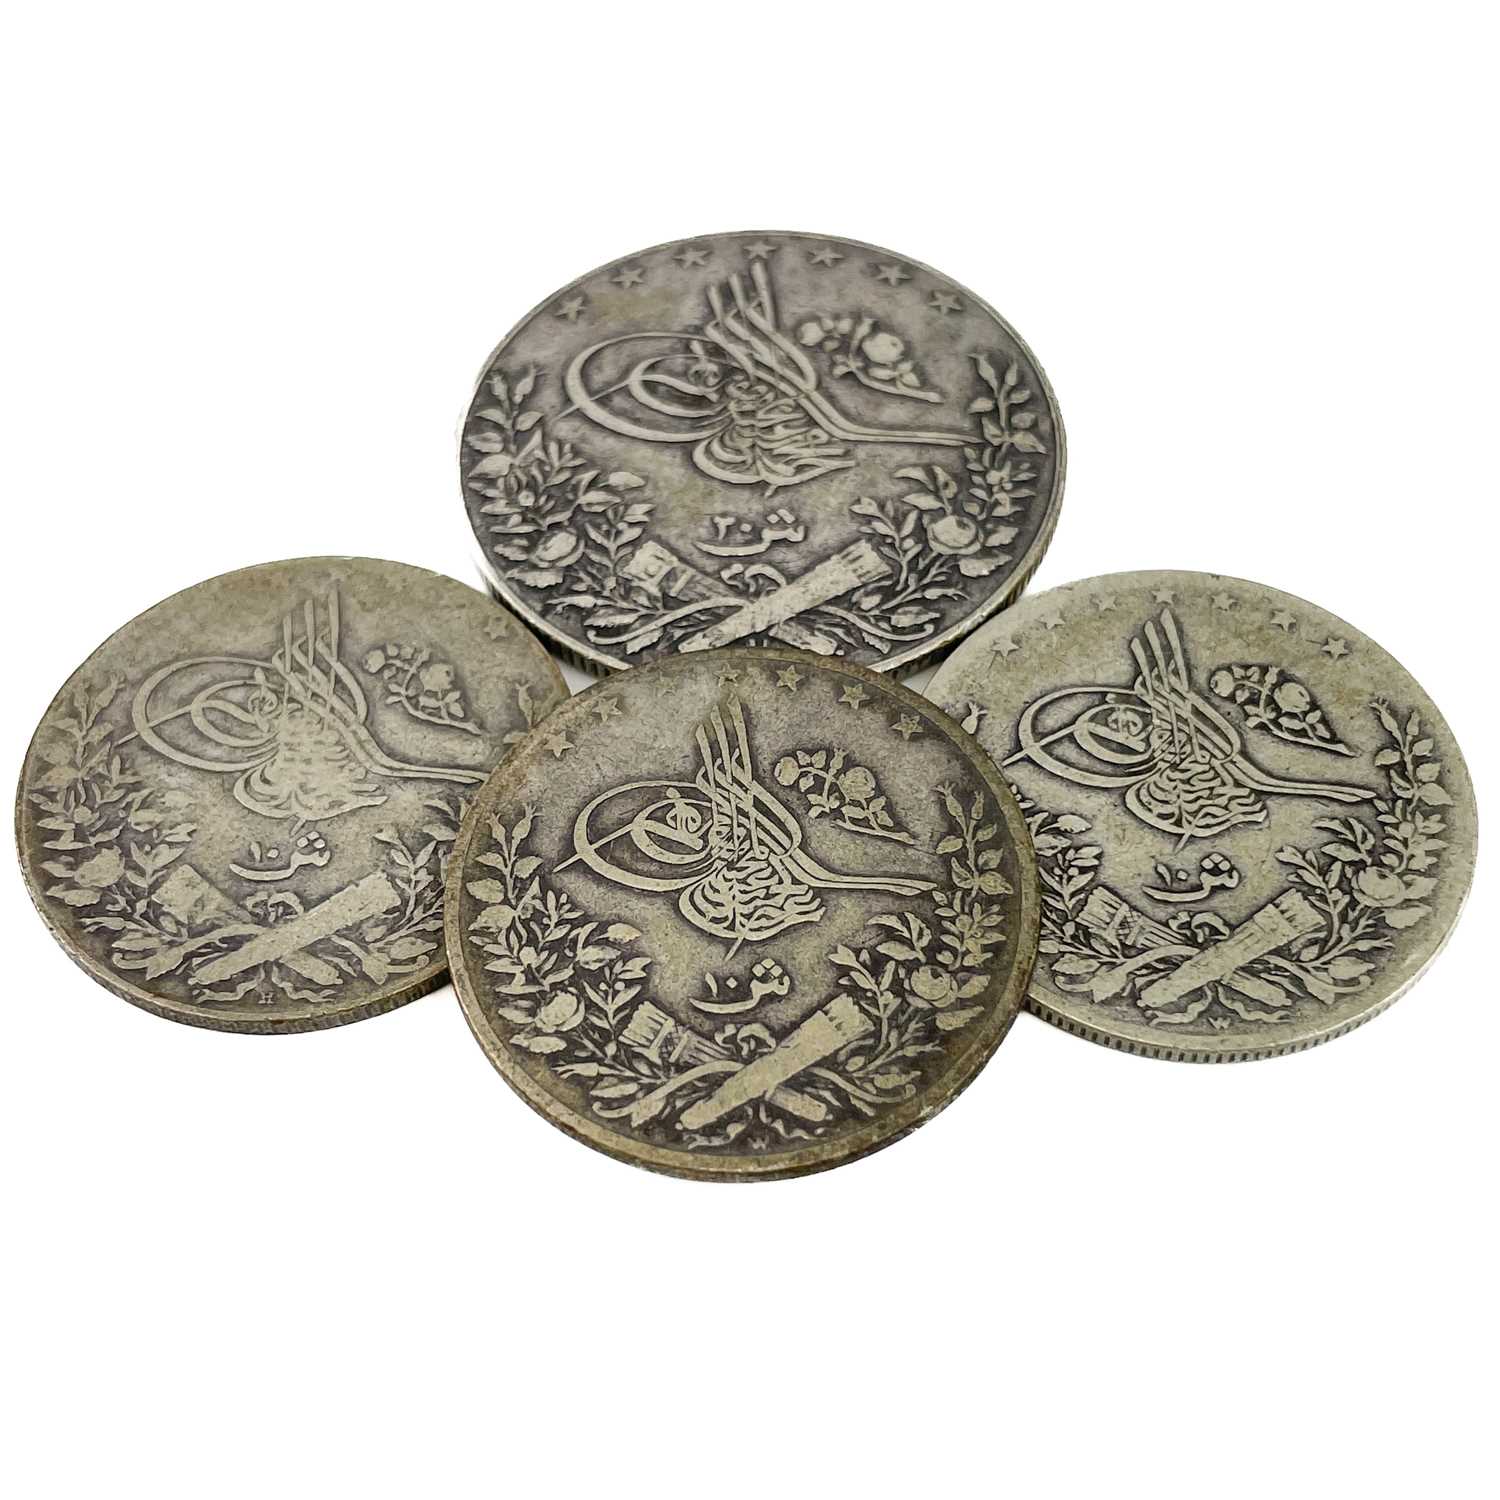 Late 19th/Early 20th Century Egypt Silver Coinage. - Image 3 of 5